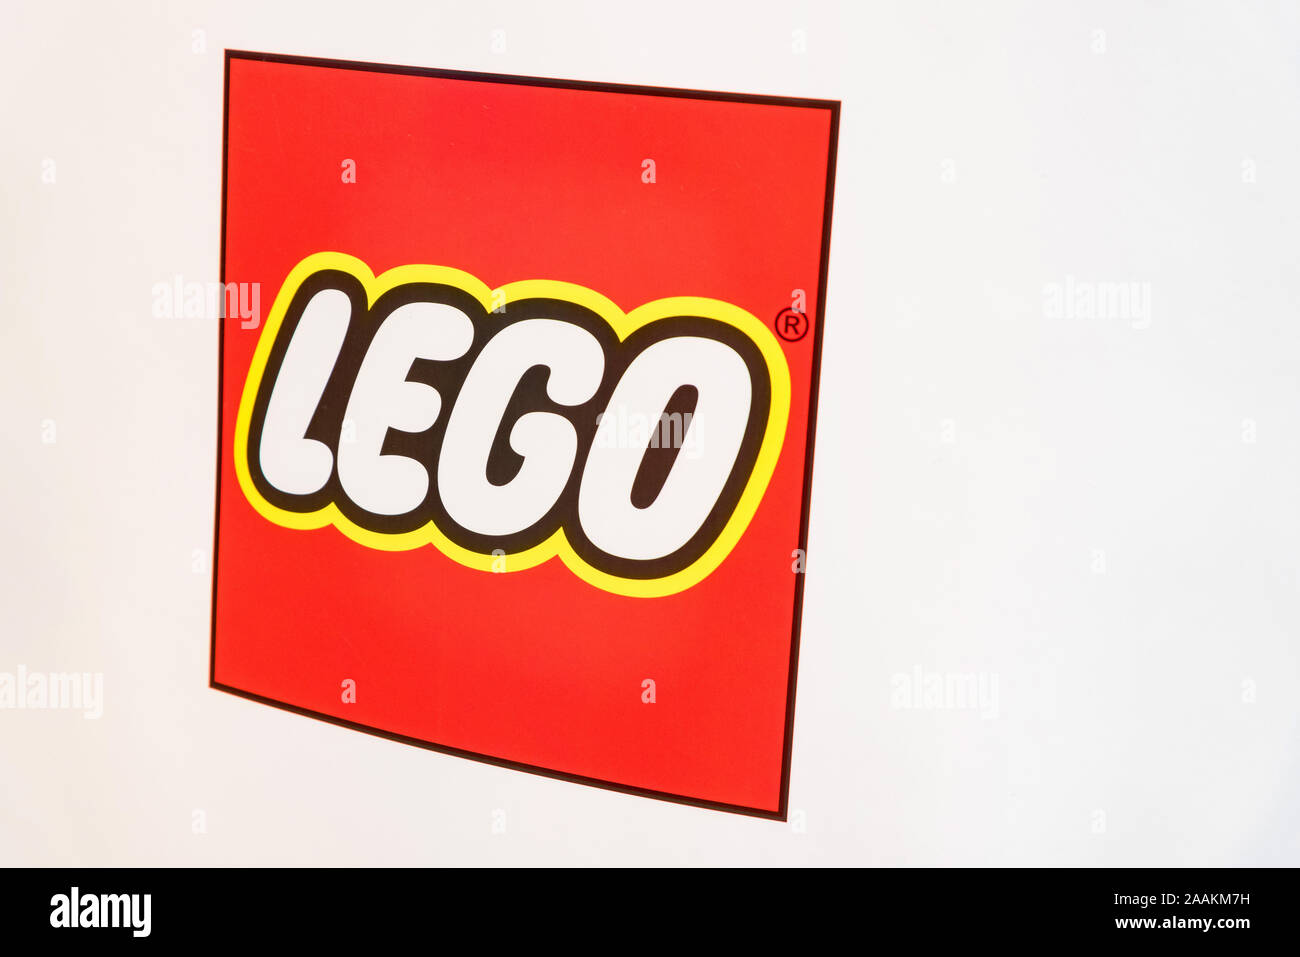 ROSTOV-ON-DON, RUSSIA - CIRCA OCTOBER 2019: Illustrative editorial photo of Lego logo. Lego is a line of plastic construction toys that are manufactur Stock Photo